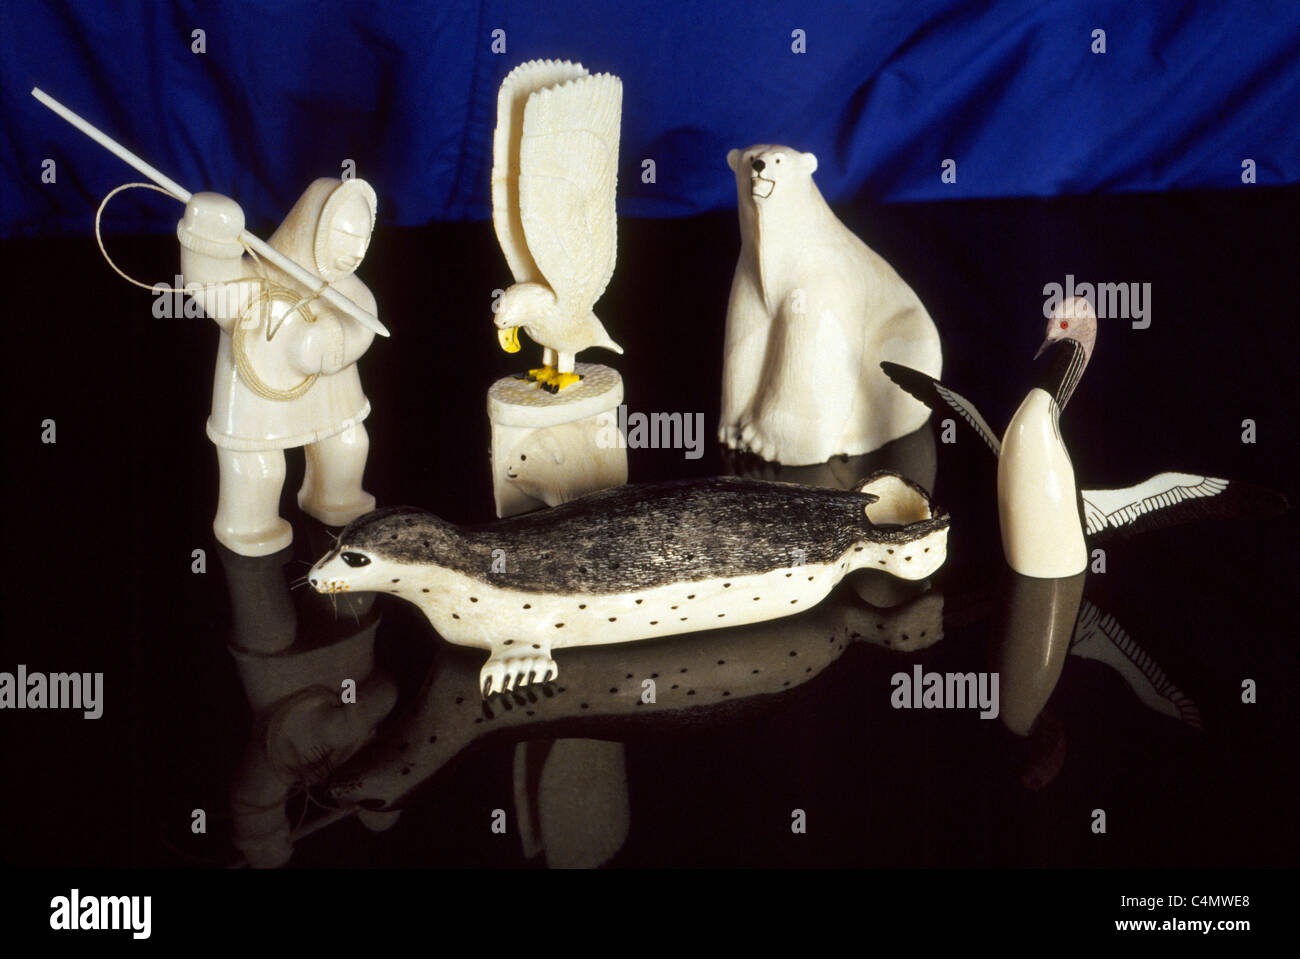 Ivory carvings like this hunter, eagle, polar bear, seal and seabird are treasured handicrafts sculpted by Native Alaskan artists in Alaska, USA. Stock Photo